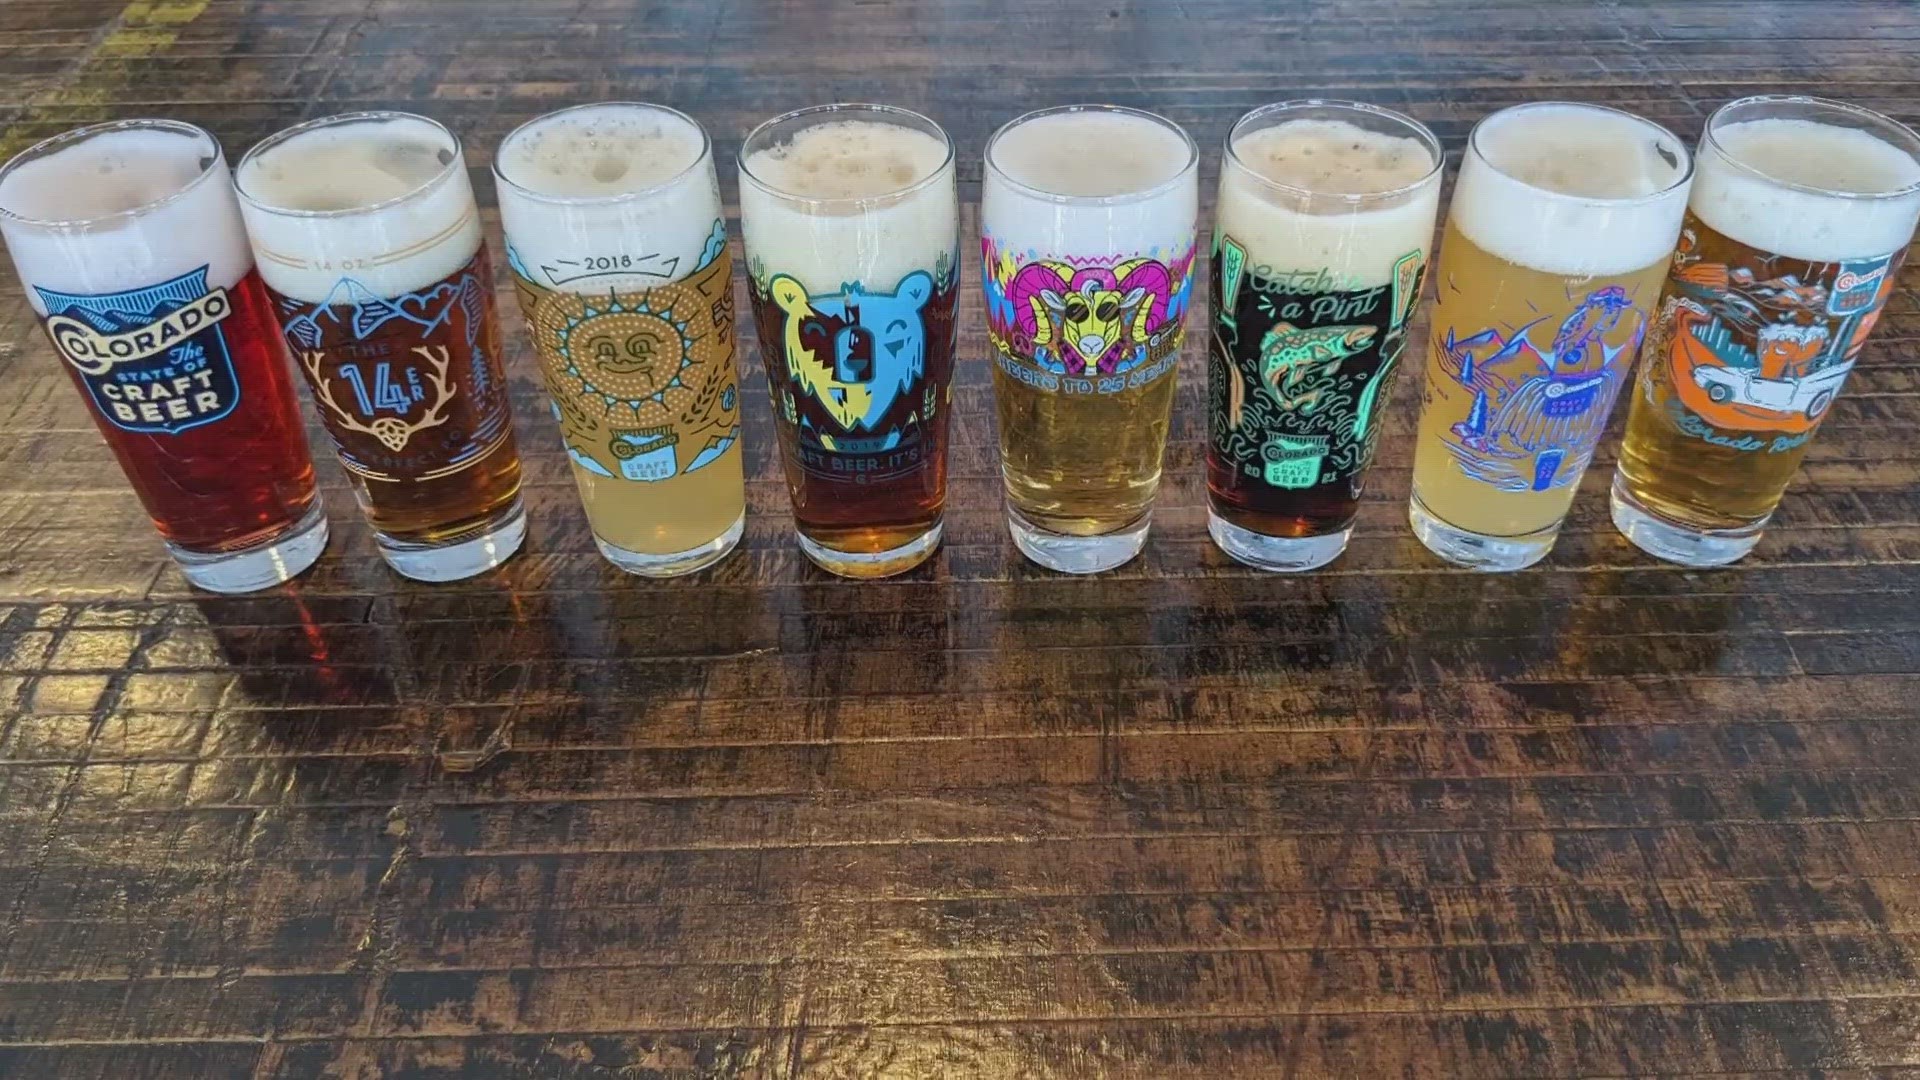 Craft beer lovers across Colorado can visit participating member breweries that will be selling limited-edition Colorado Pint Day glasses.